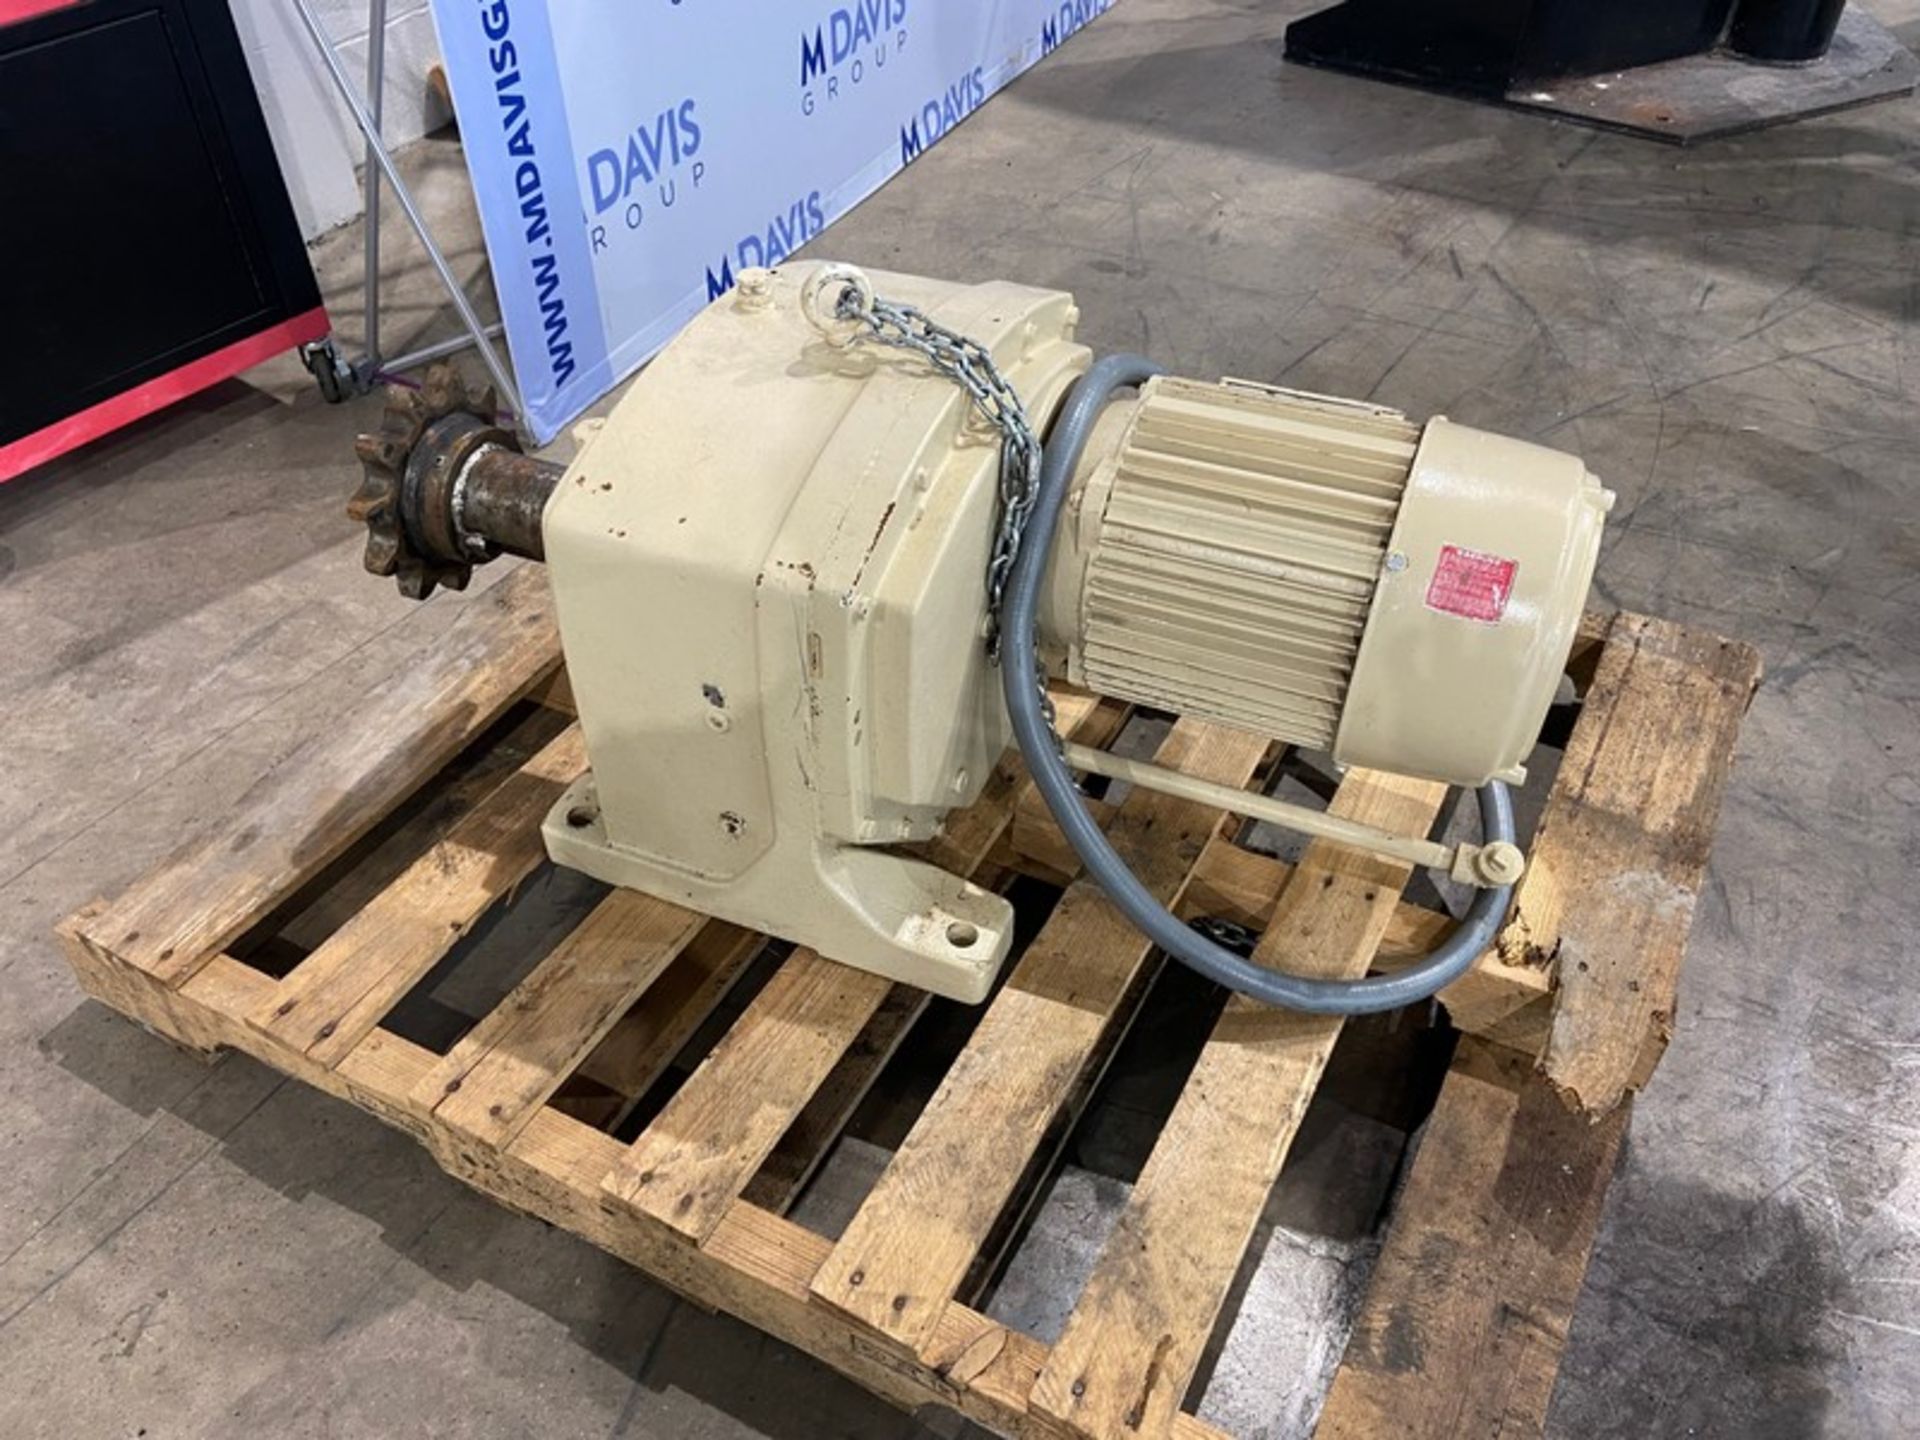 U.S. Electric 10 hp Drive,230/460 Volts, 3 Phase (INV#97183) (Located @ the MDG Auction Showroom 2.0